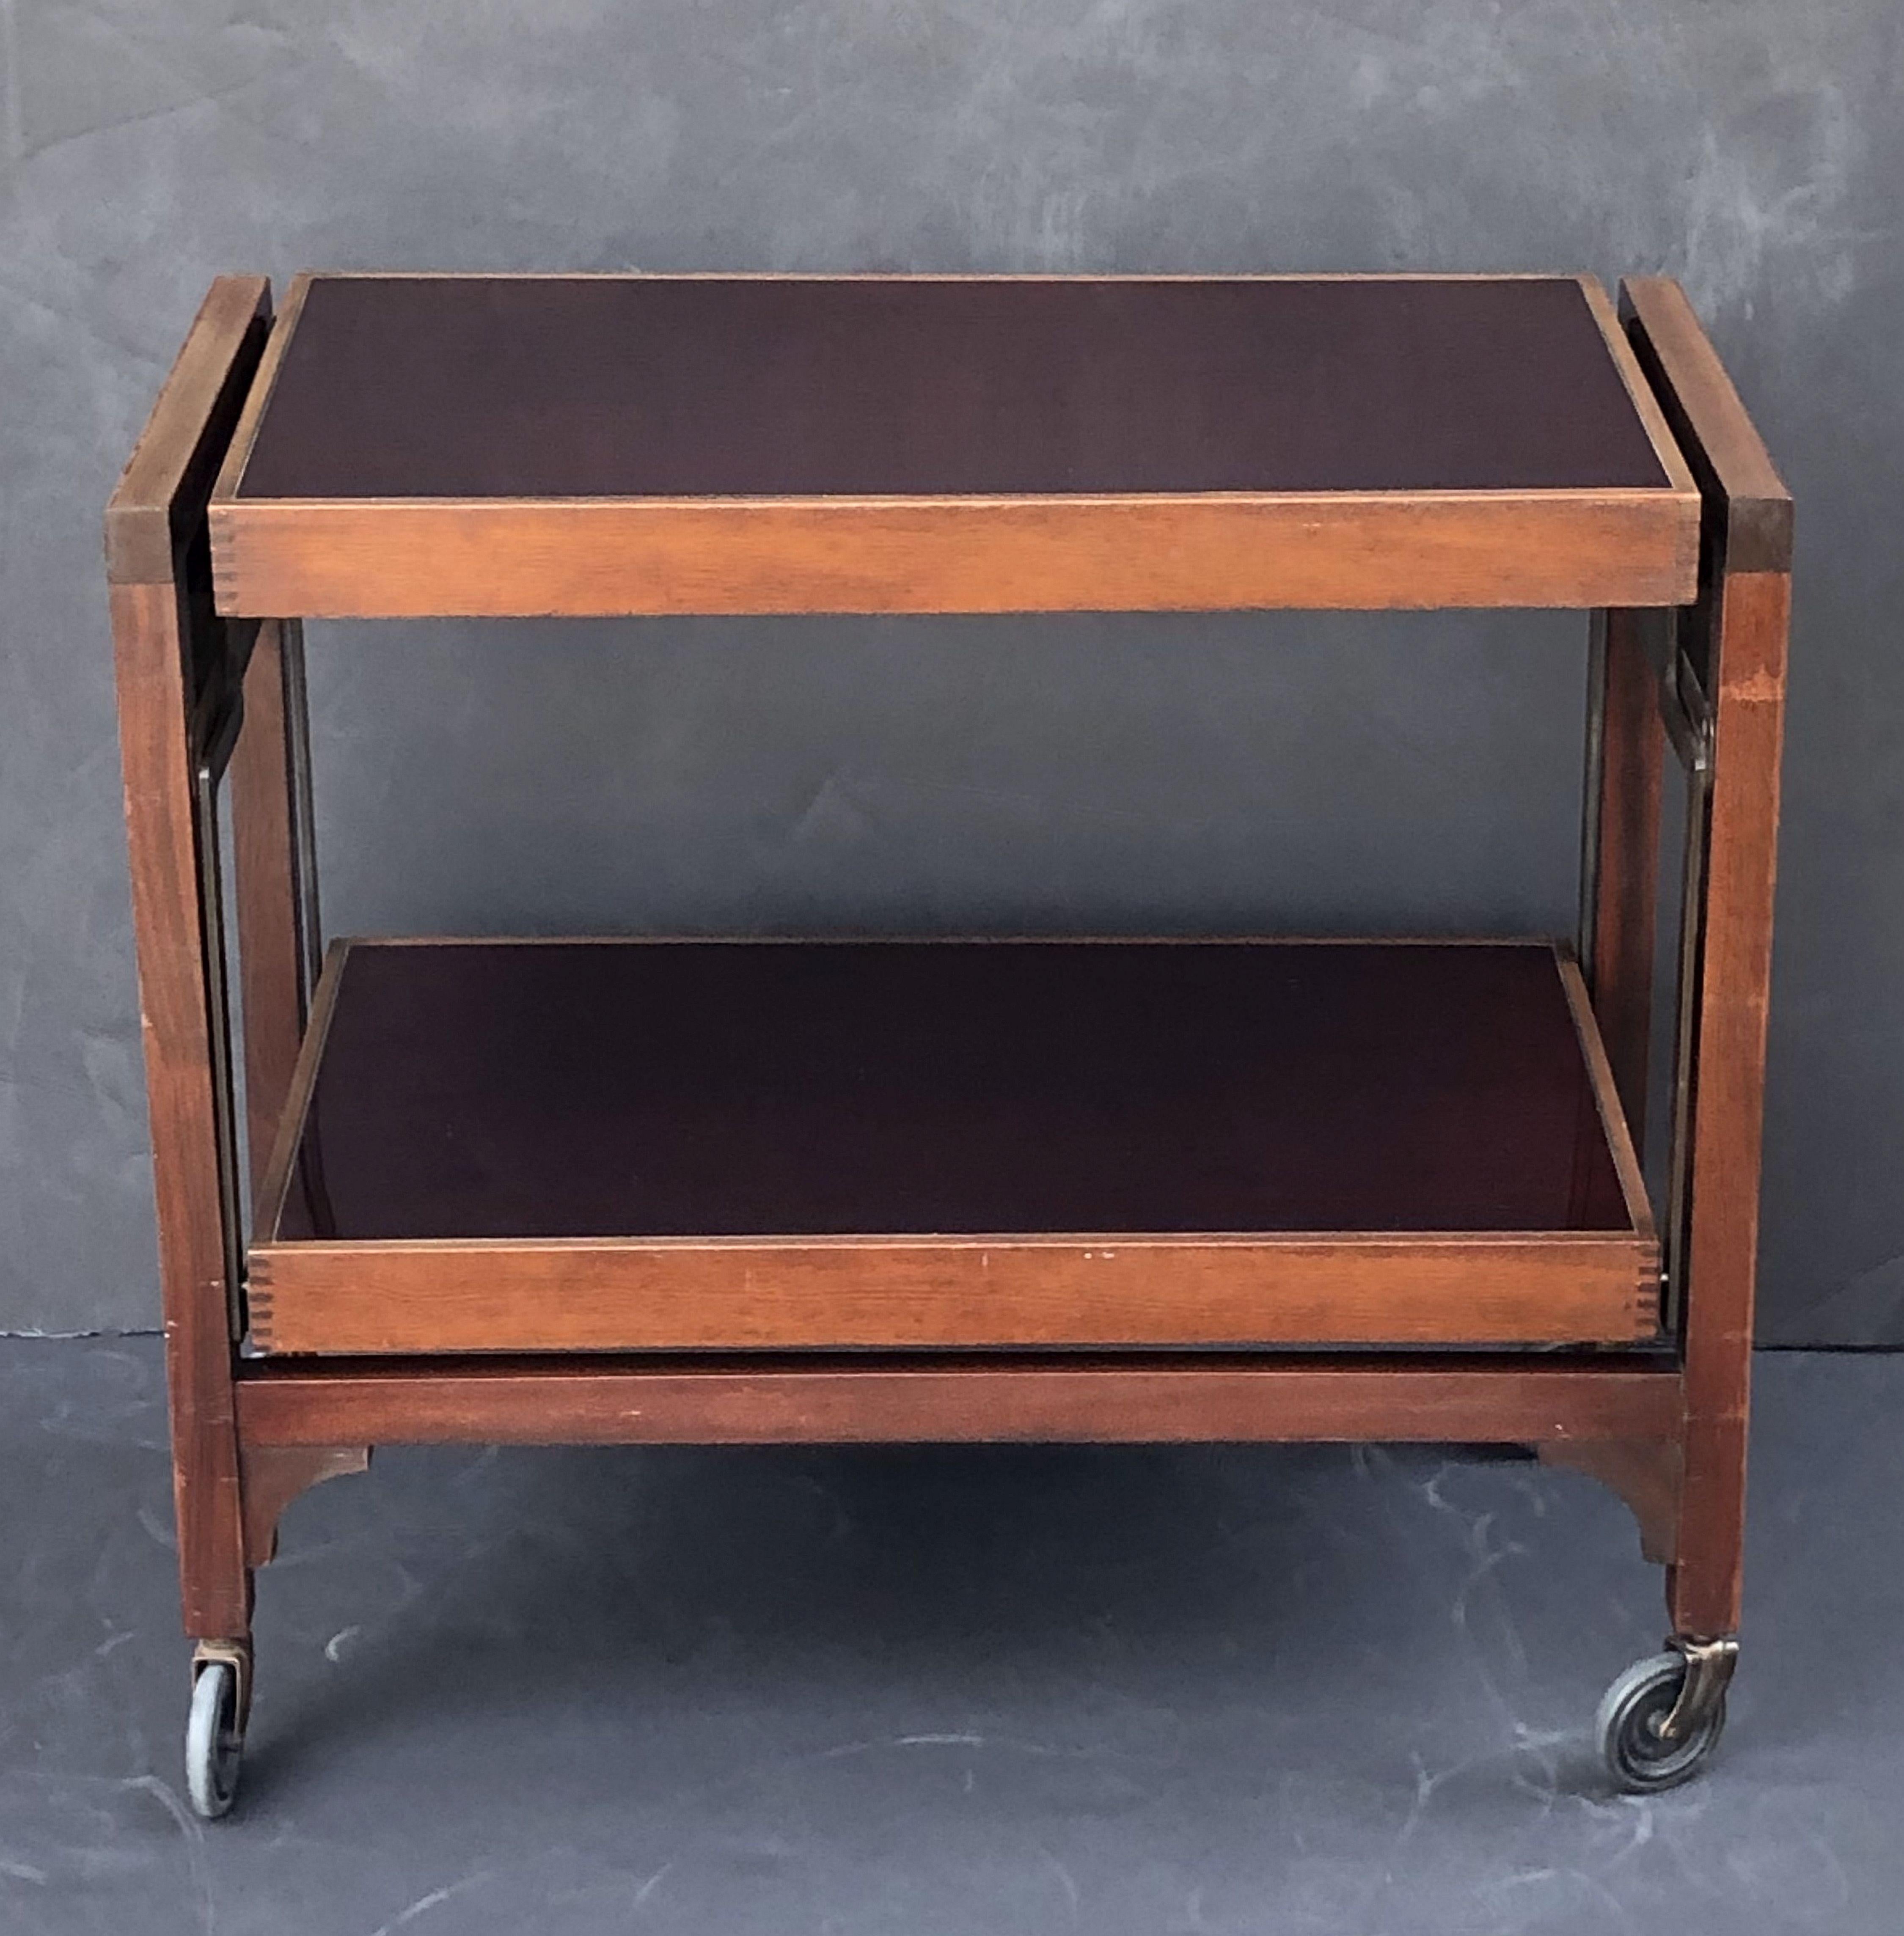 20th Century English Metamorphic Drinks Cart or Trolley, Convertible to Occasional Table